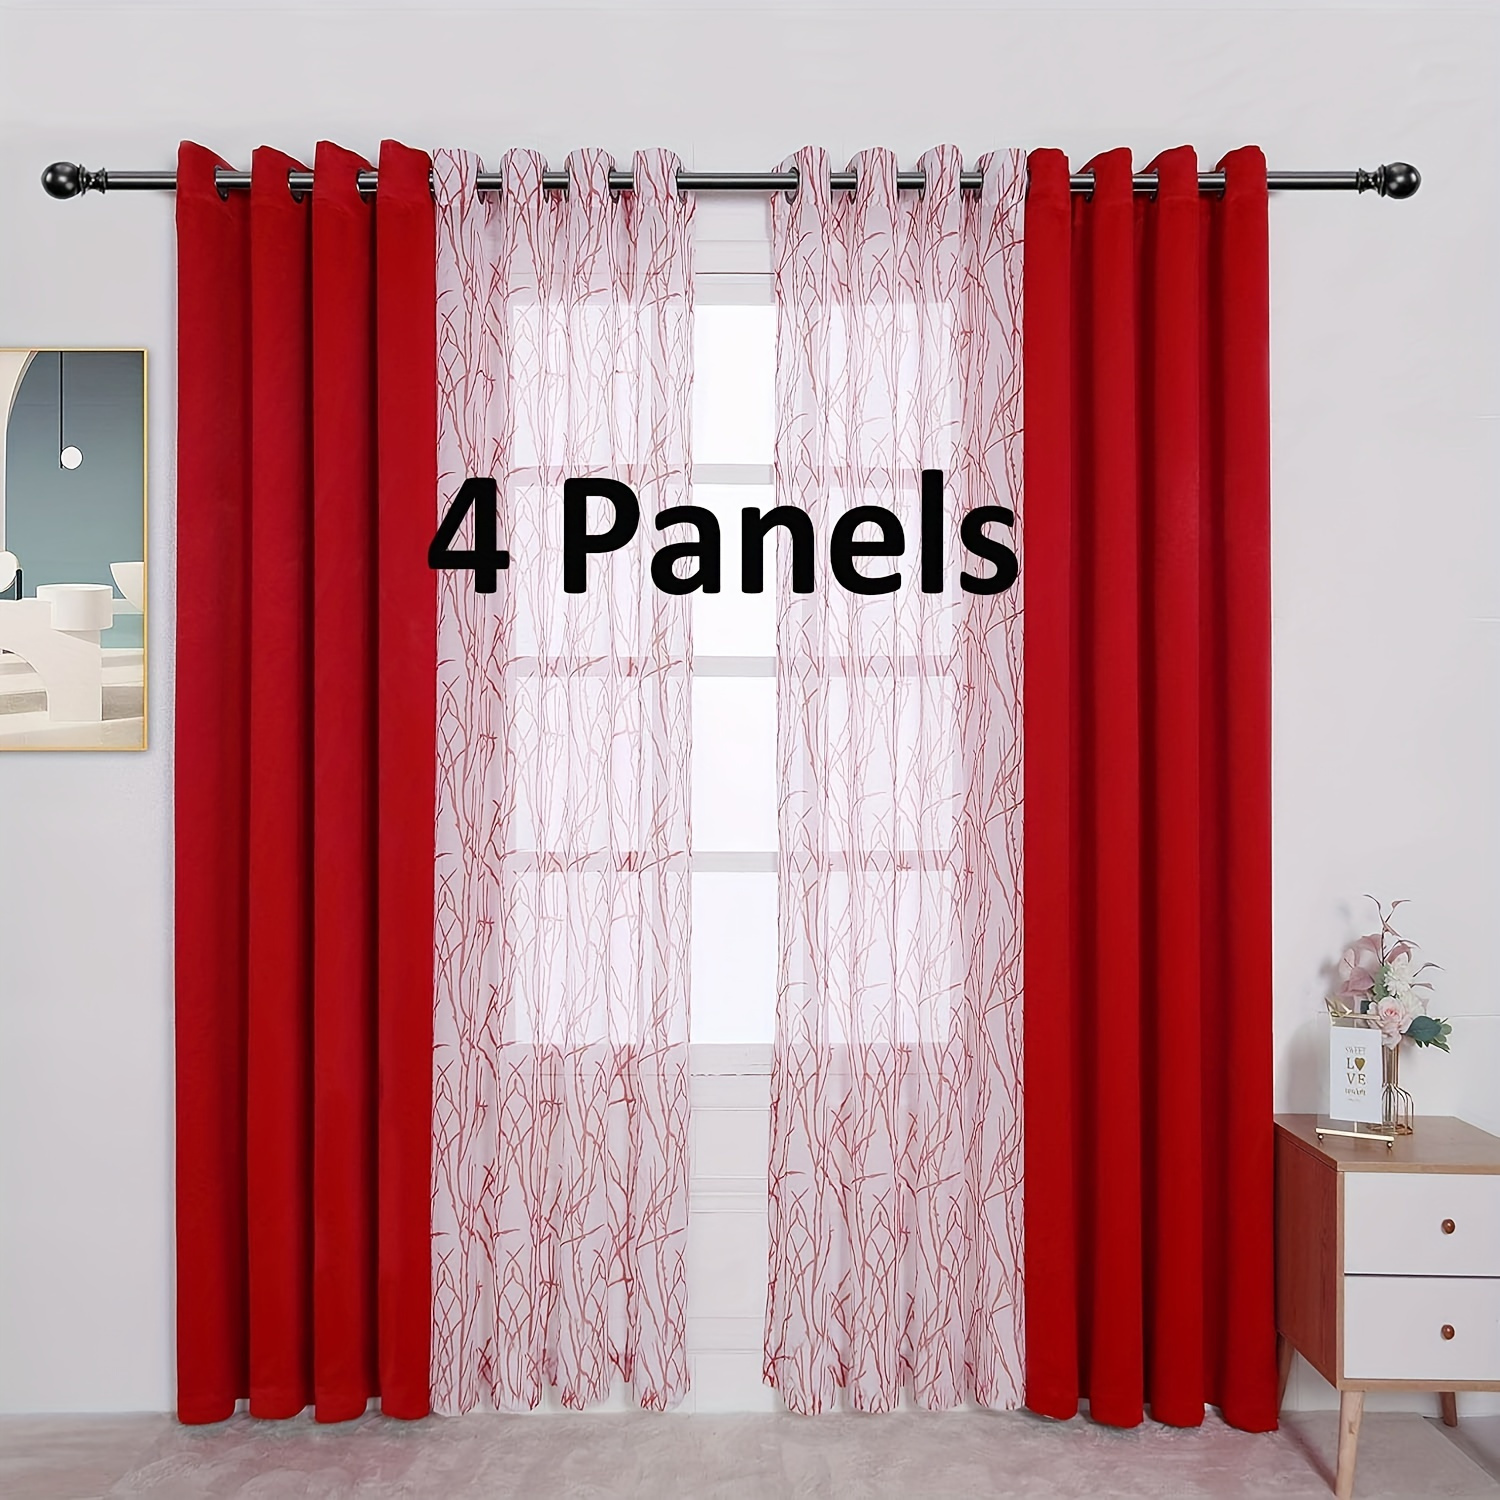 

4-piece Set Classic Branch Print Sheer & Blackout Curtains - Grommet Top, Heat-insulating Drapes For Living Room, Bedroom, Office - Versatile Home Decor